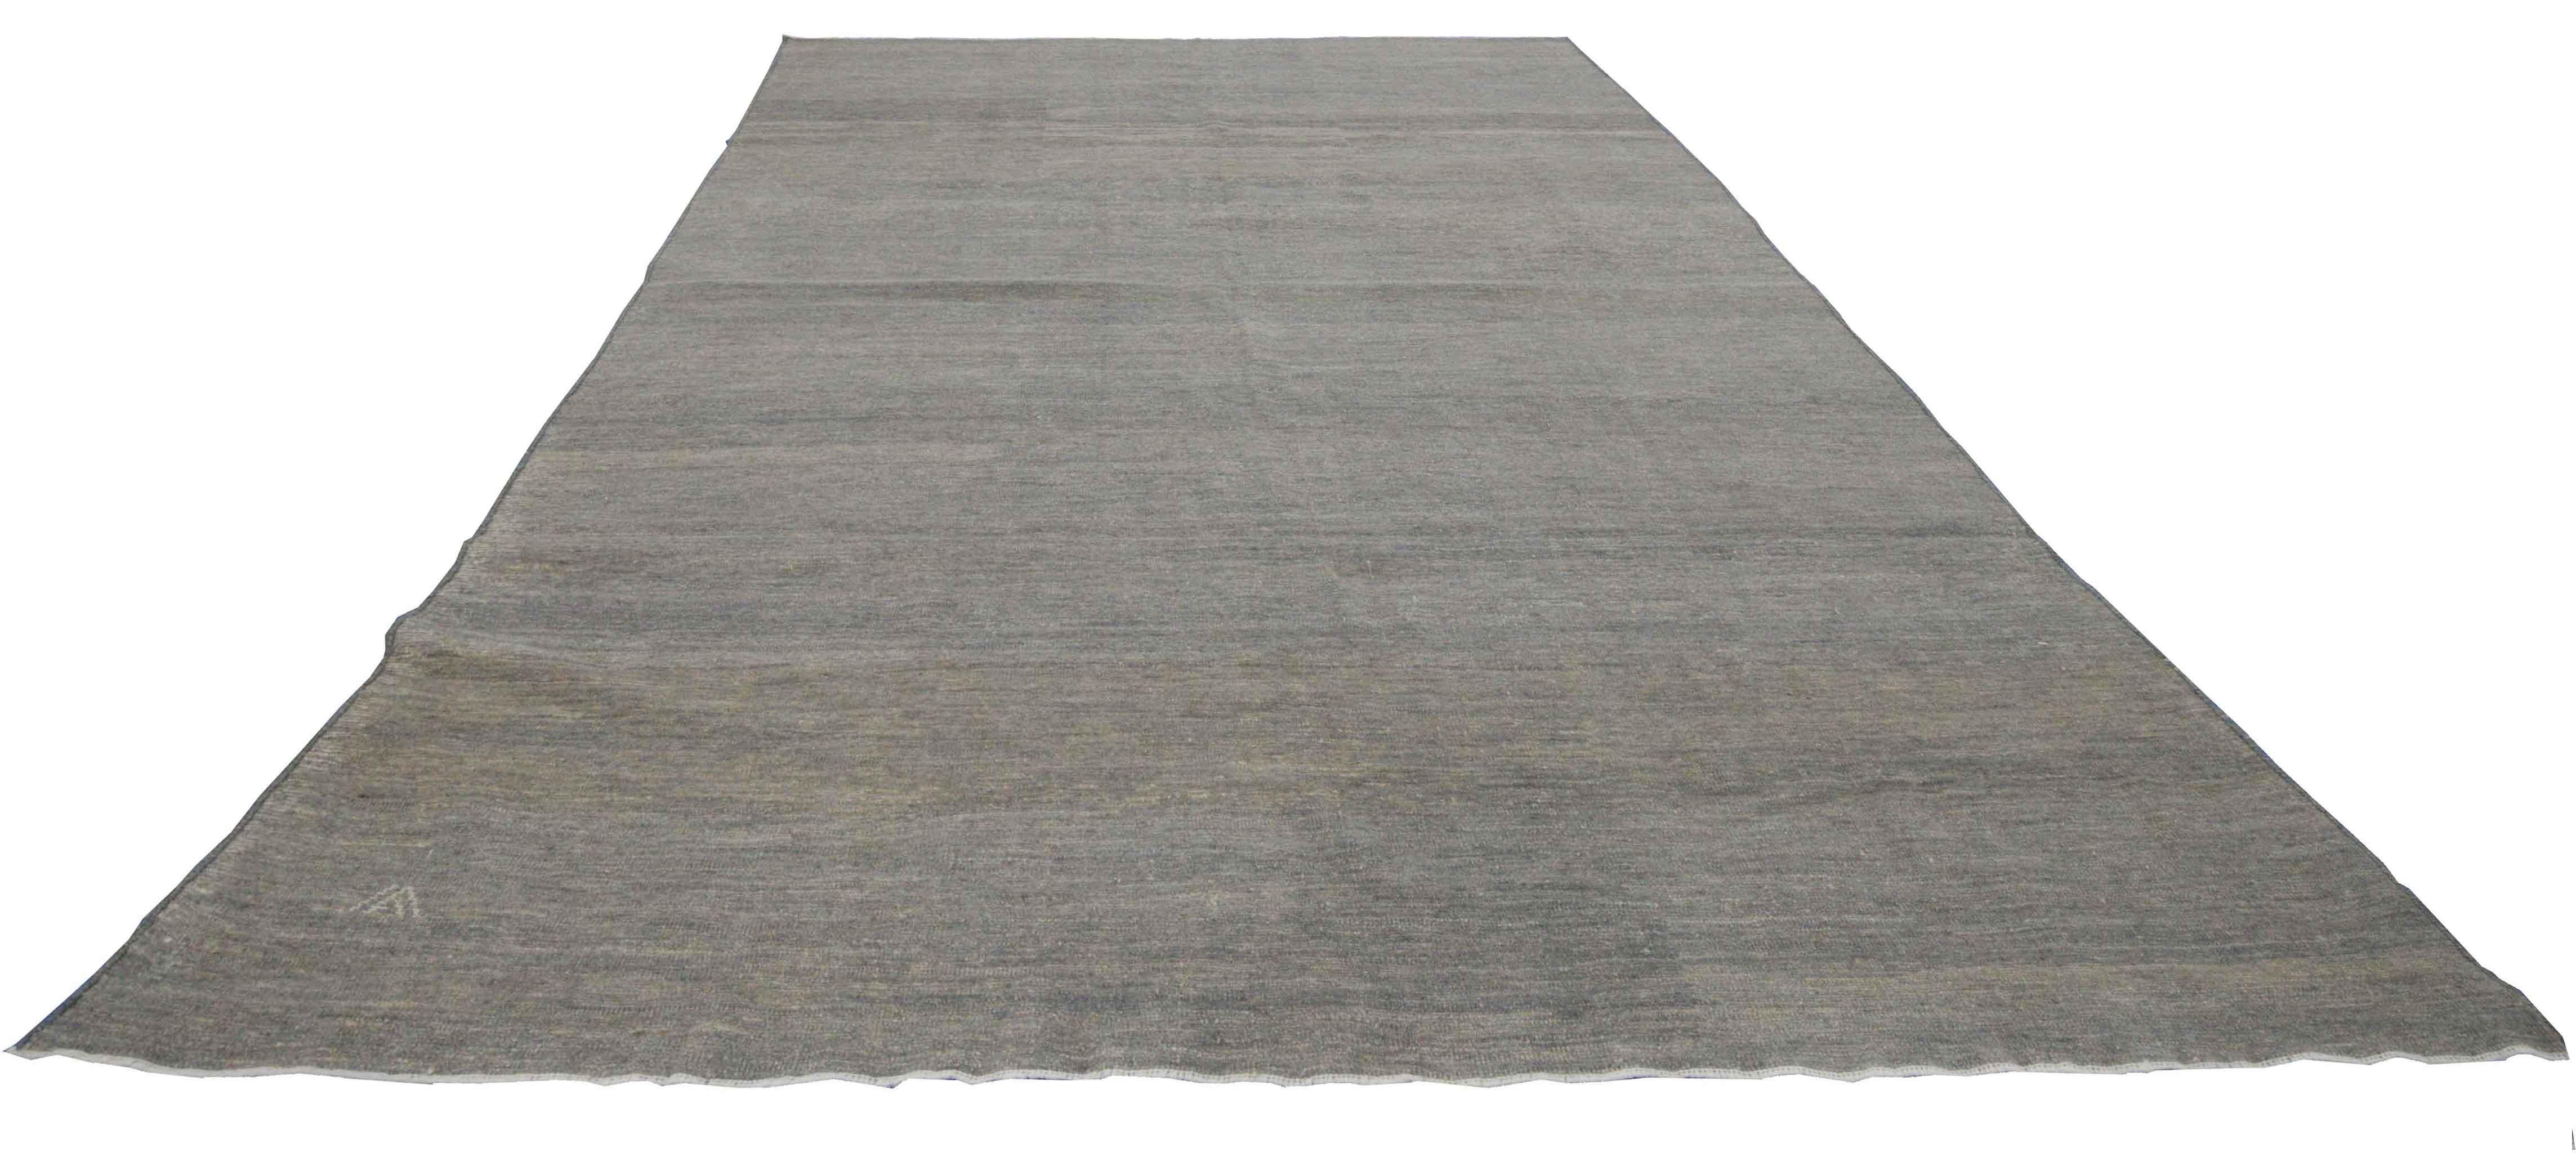 Modern Turkish runner rug made of handwoven sheep’s wool of the finest quality. It’s colored with organic vegetable dyes that are certified safe for humans and pets alike. It features a beautiful beige field with ‘invisible’ floral details in gray